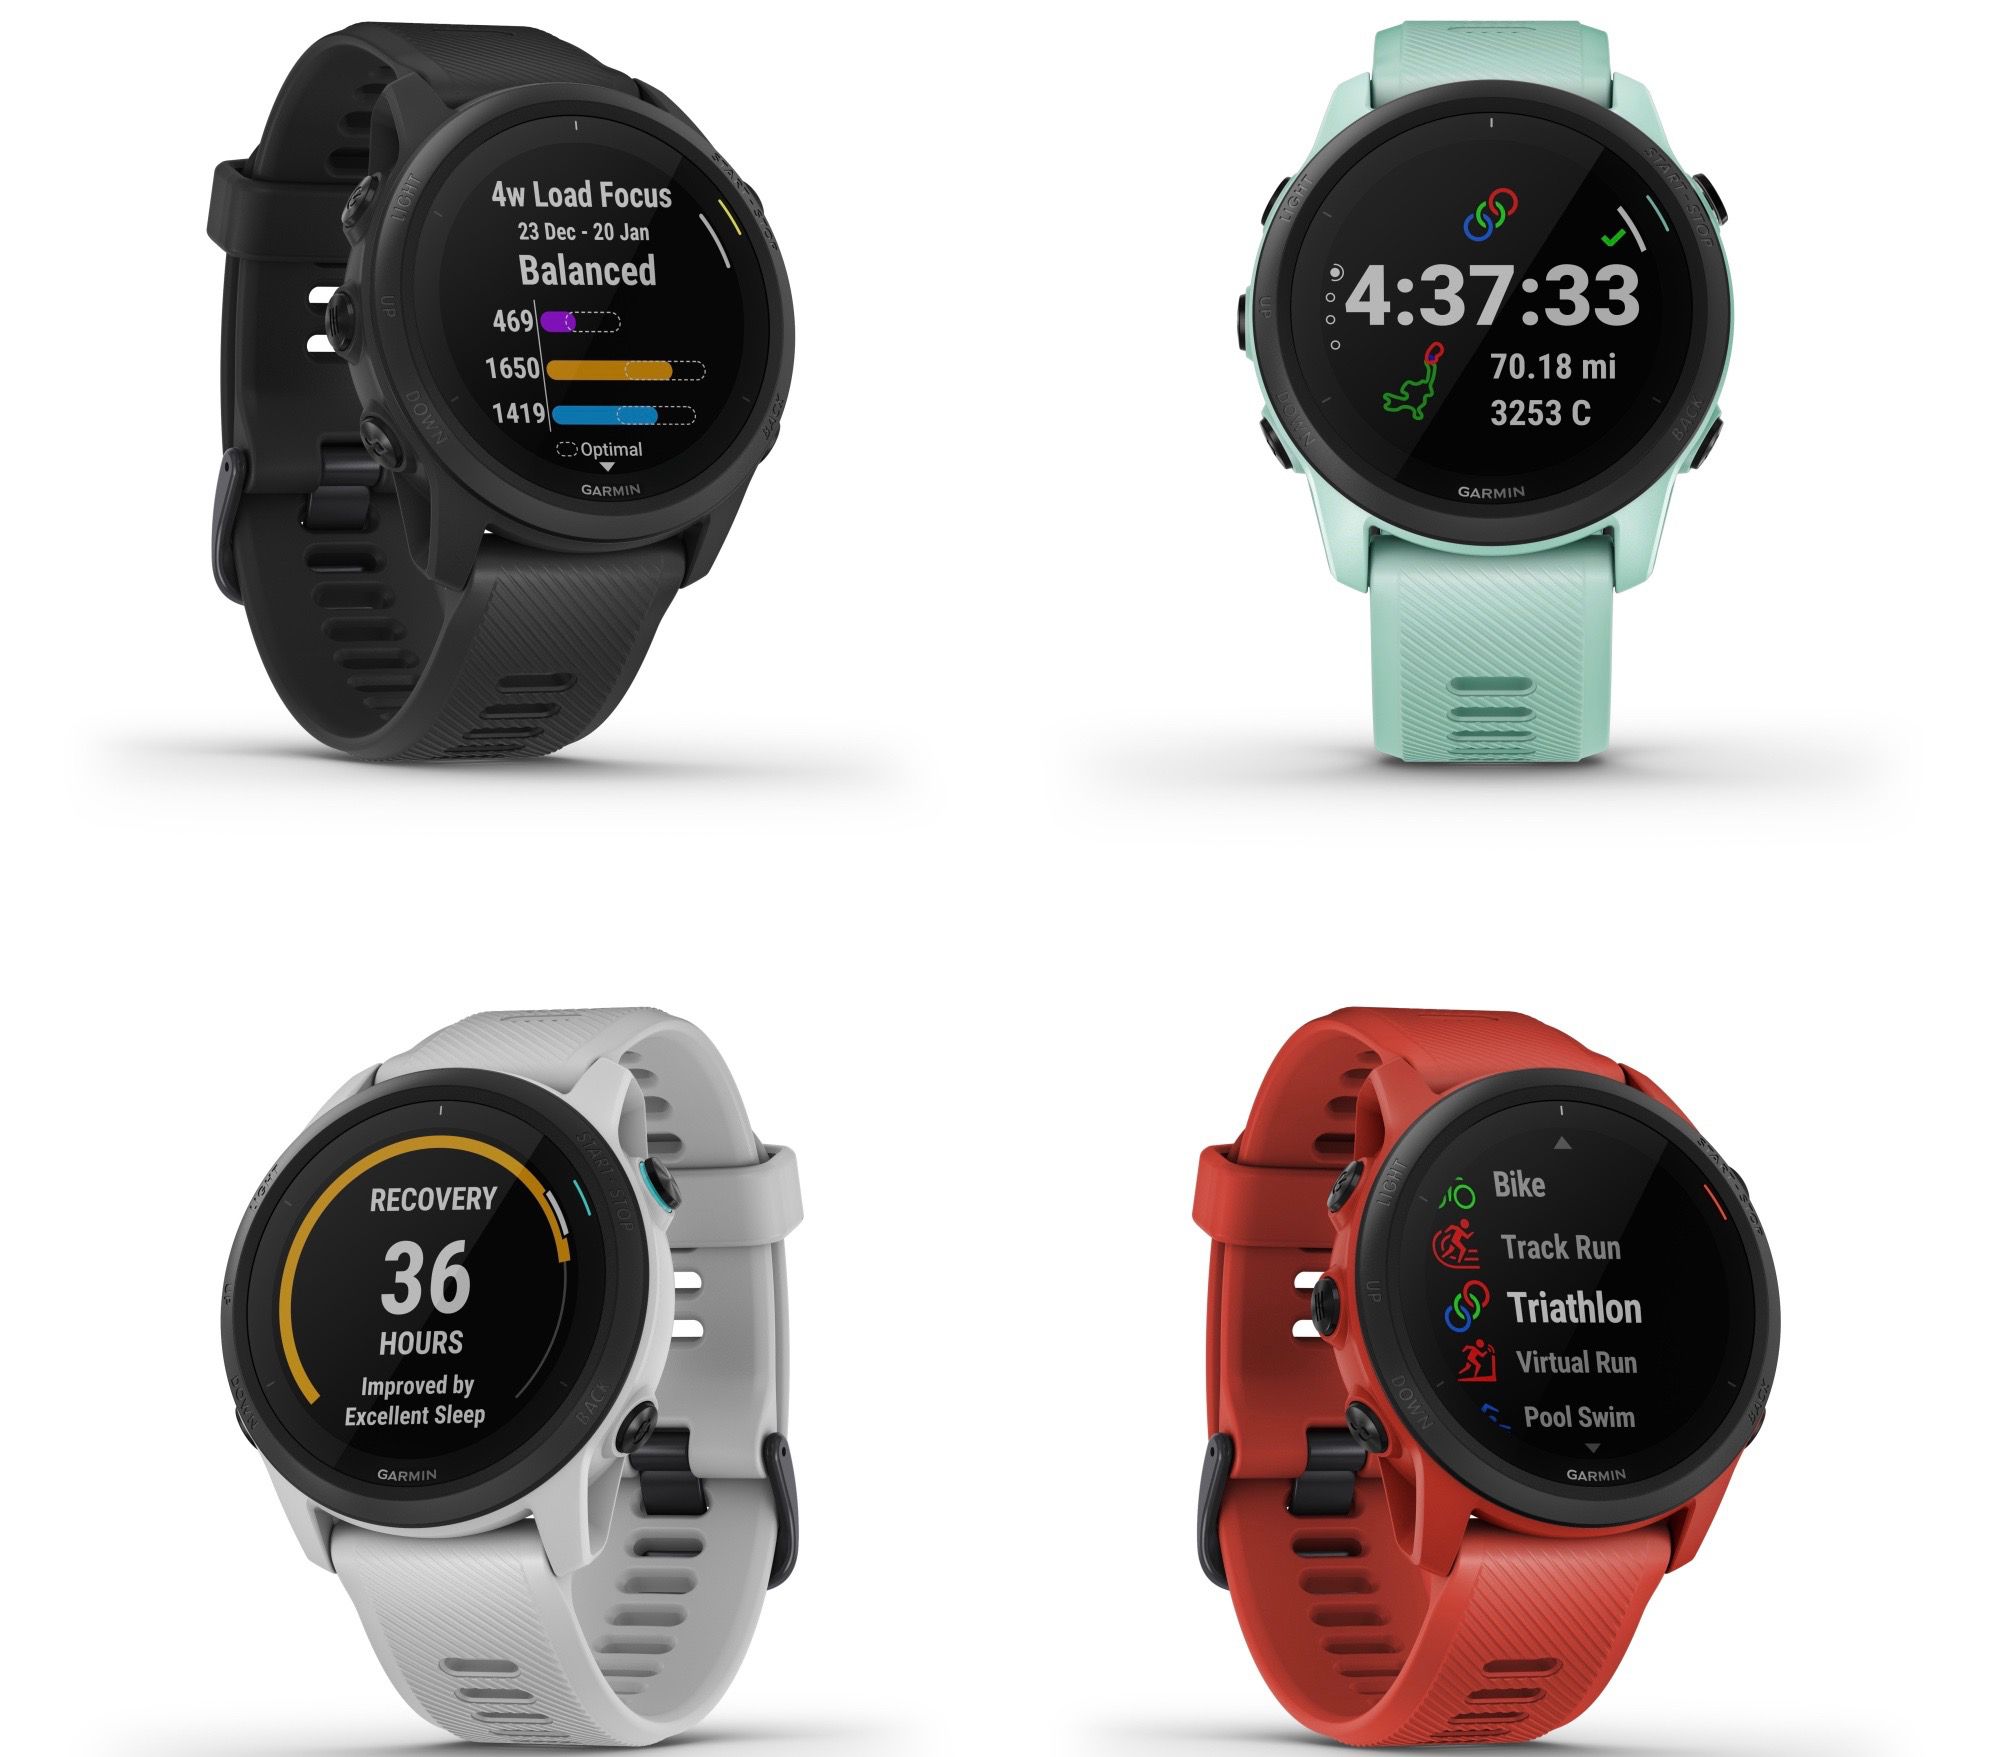 Garmin releases new GPS smartwatch to give athletes detailed data